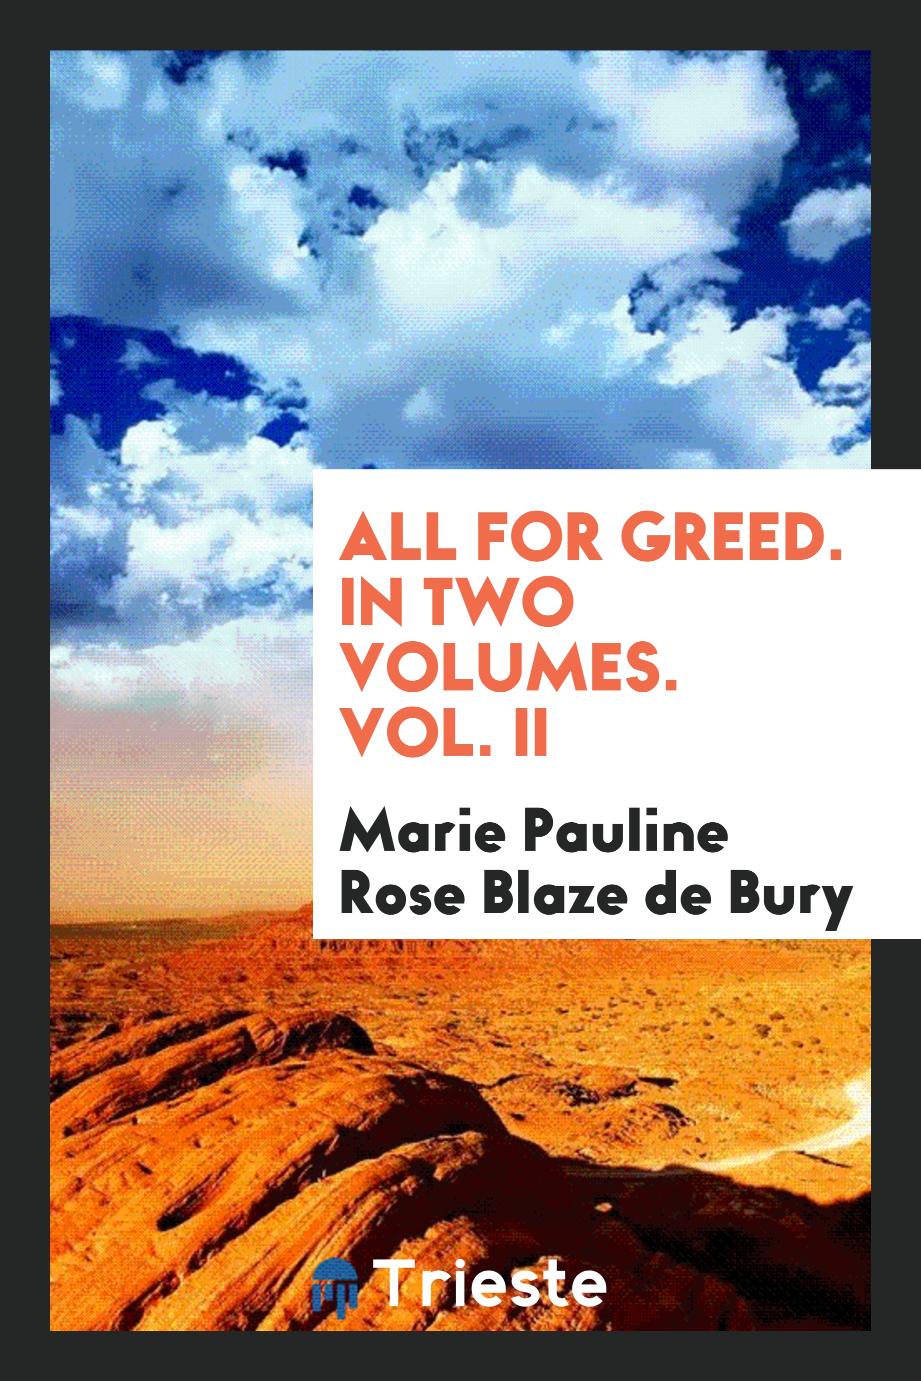 All for greed. In two volumes. Vol. II